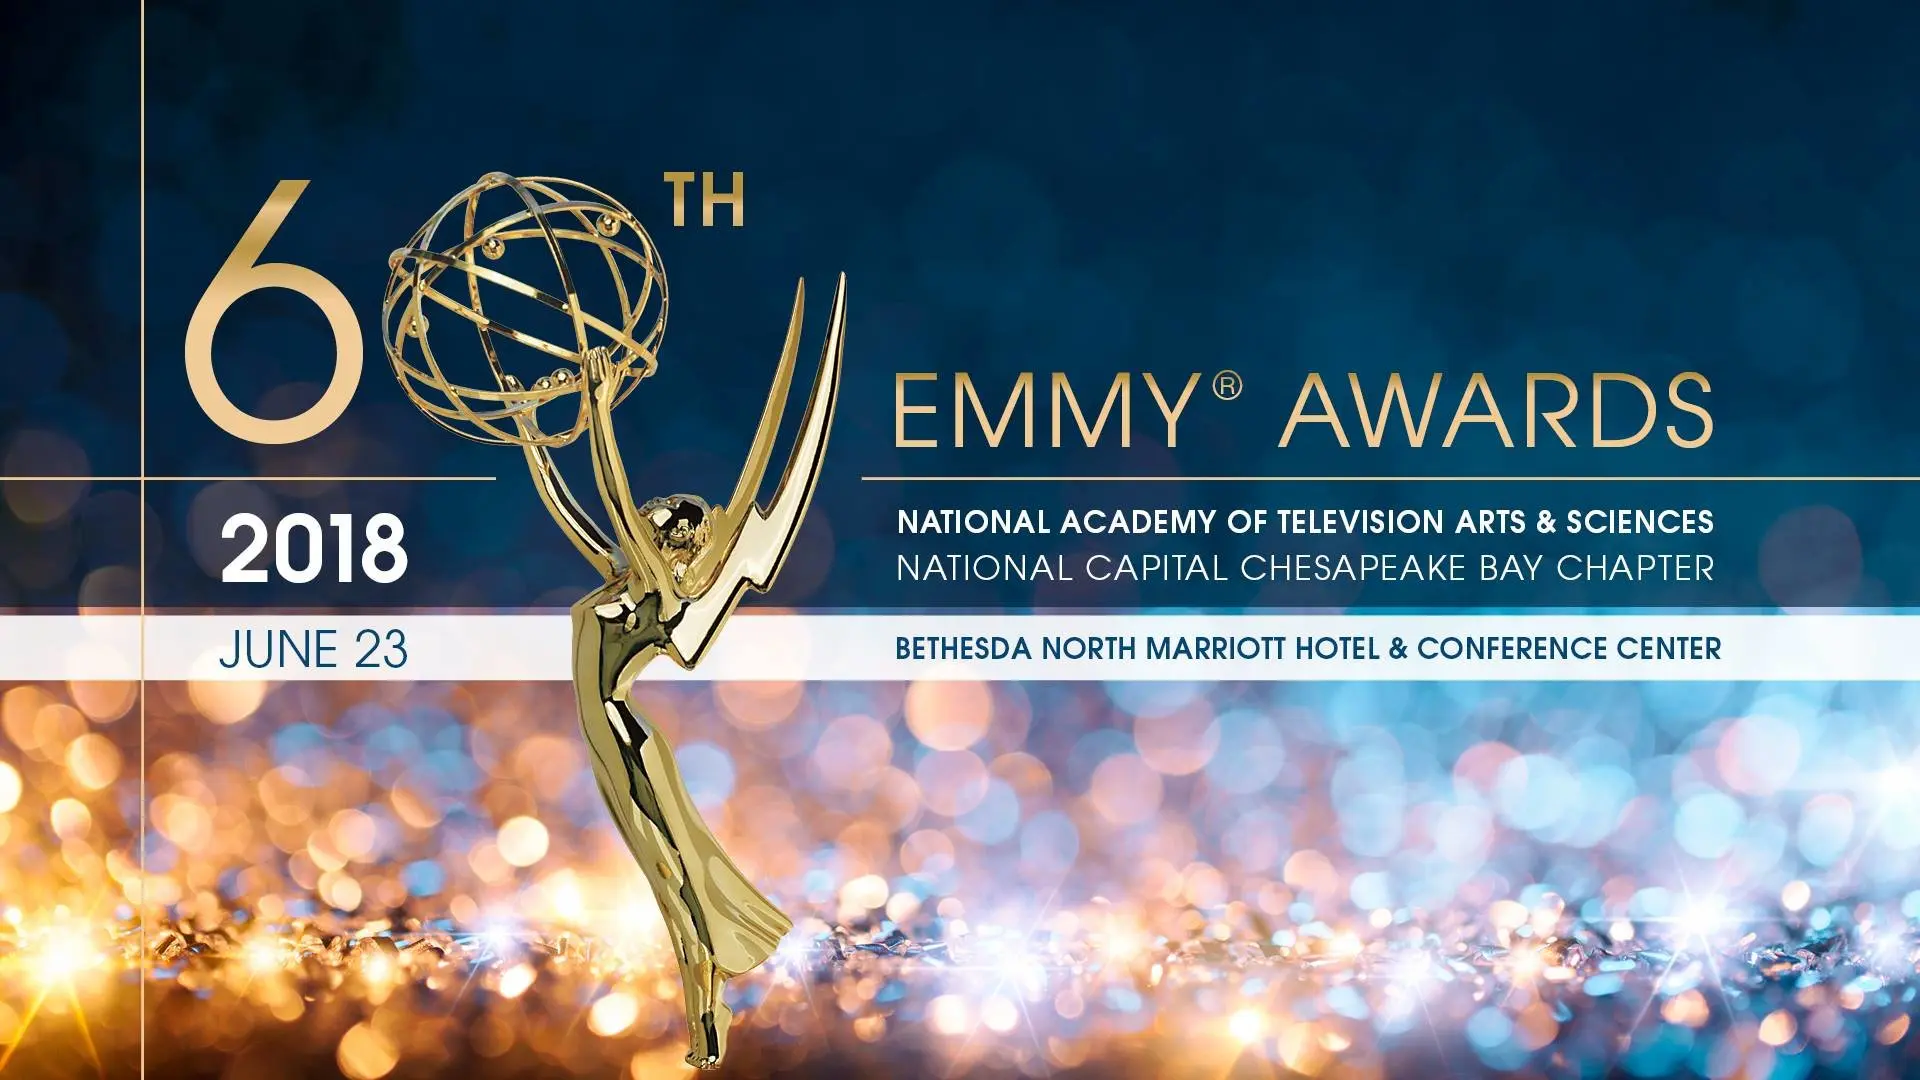 Kapowza Wins Emmy for Northrop Realty Commercial